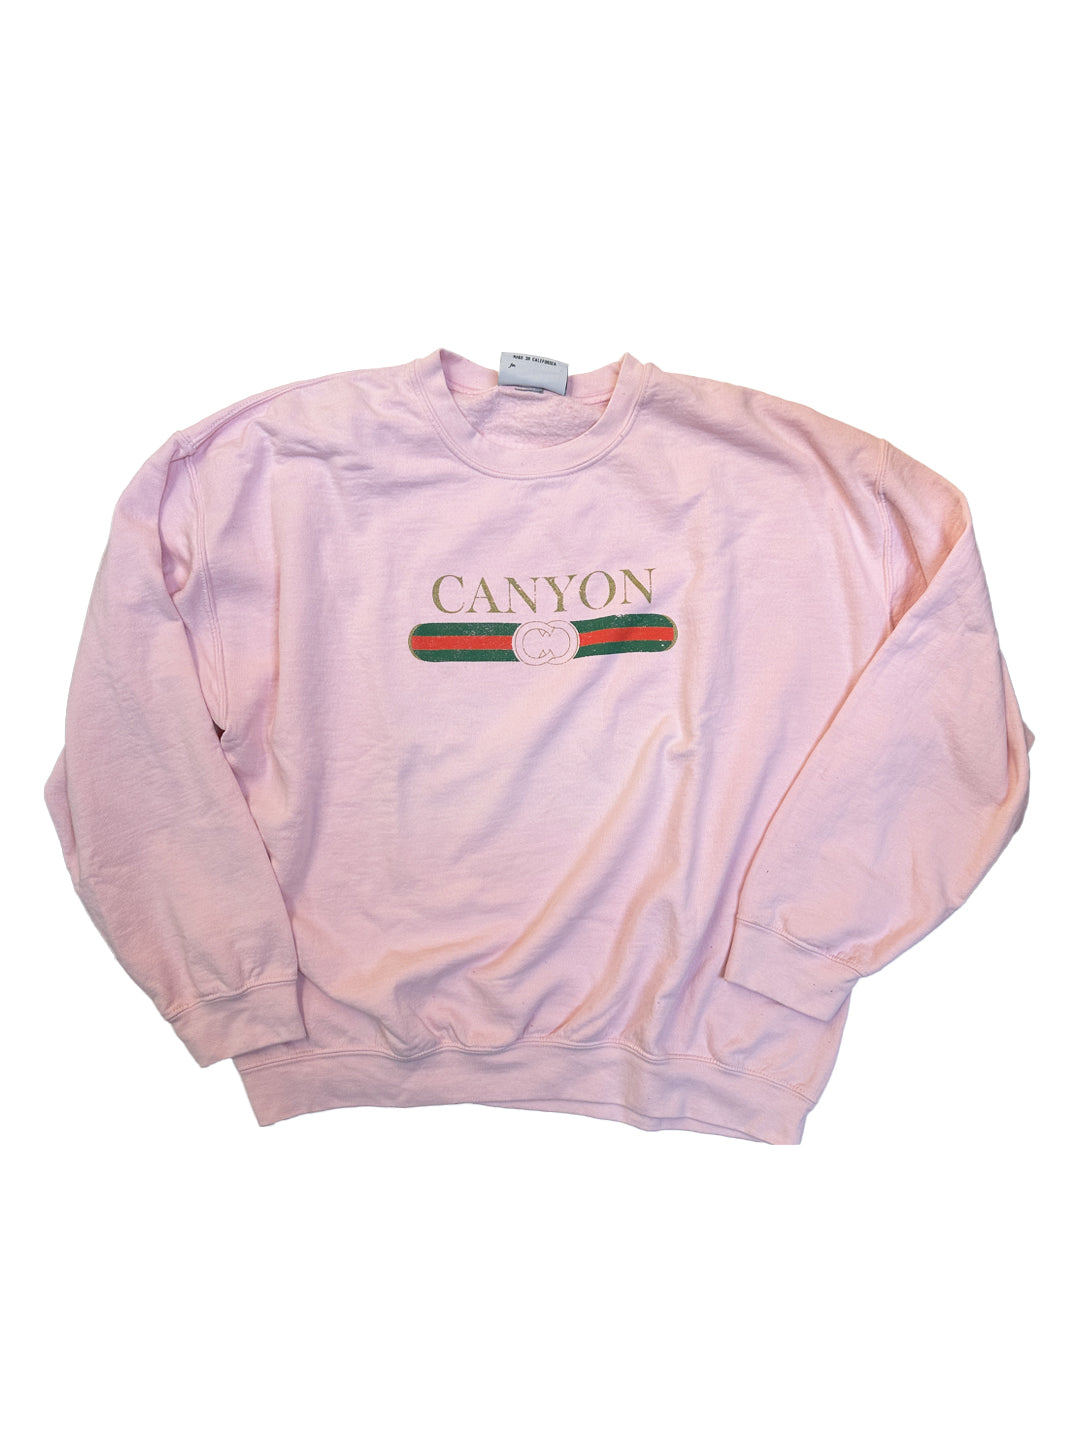 Canyon Stripe Pullover Hoodie in Dusty Rose